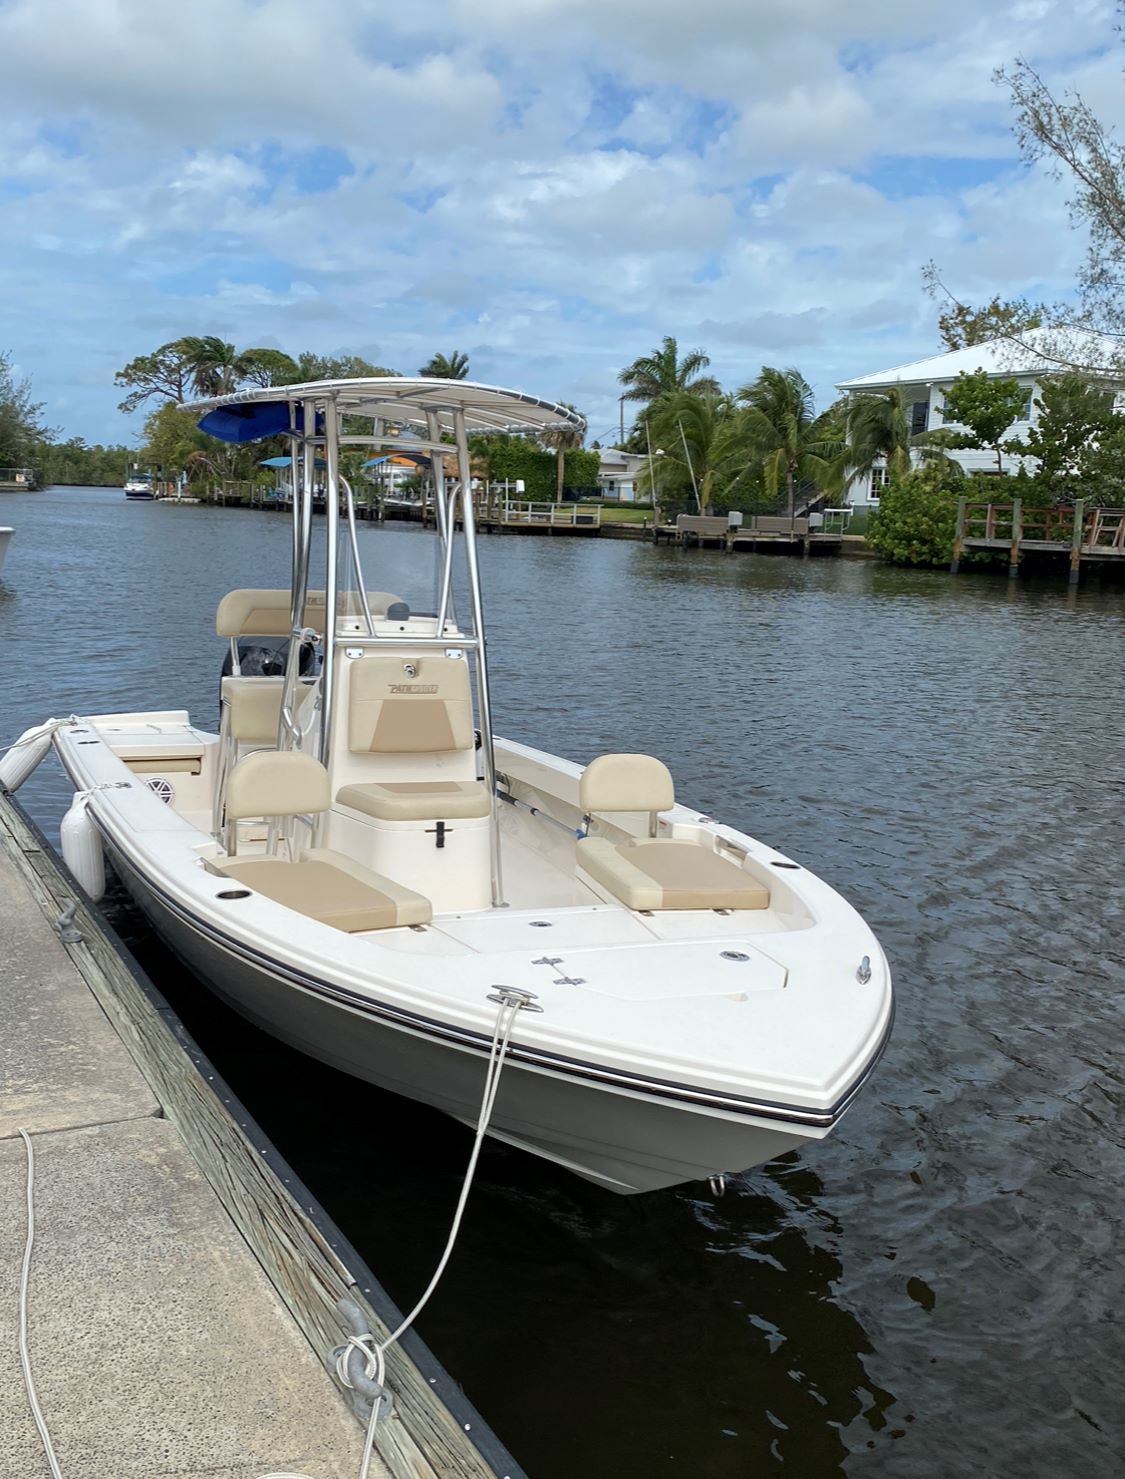 THE SHEIK (21FT Center Console Pathfinder 150 HP Fishing)